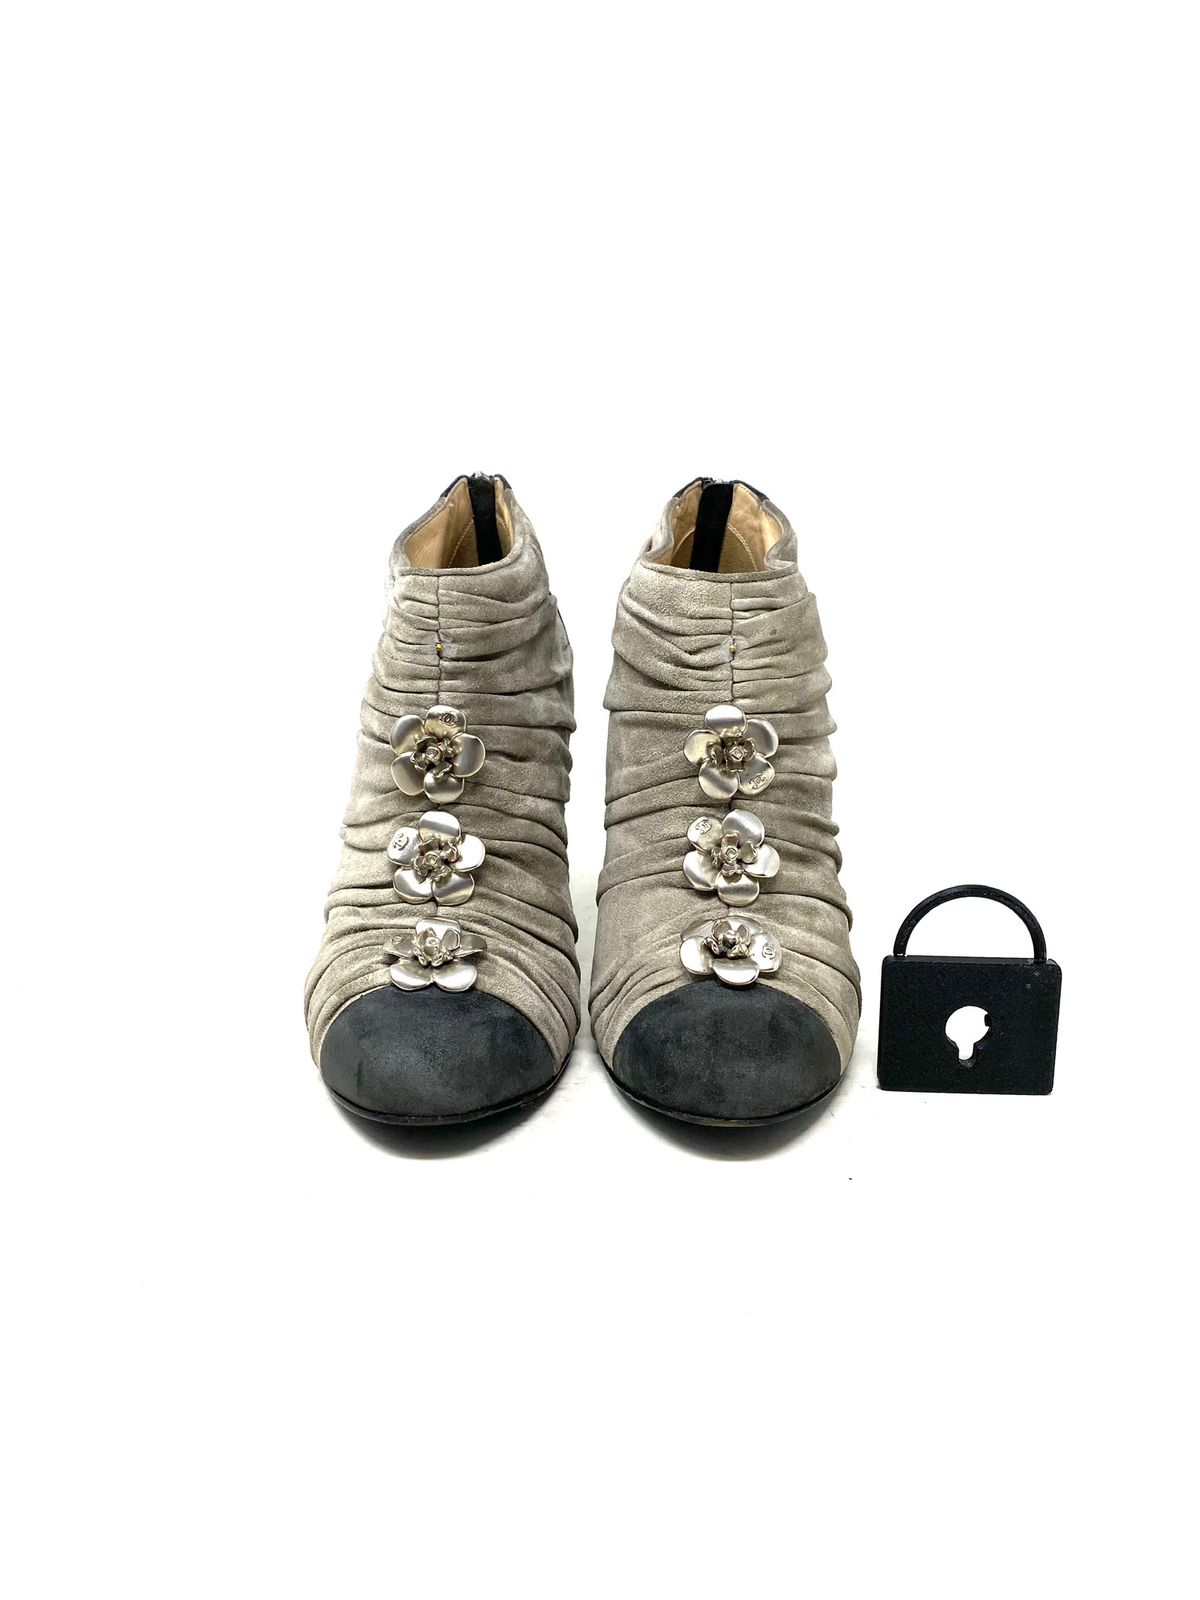 Chanel Suede Ankle Boots T37.5